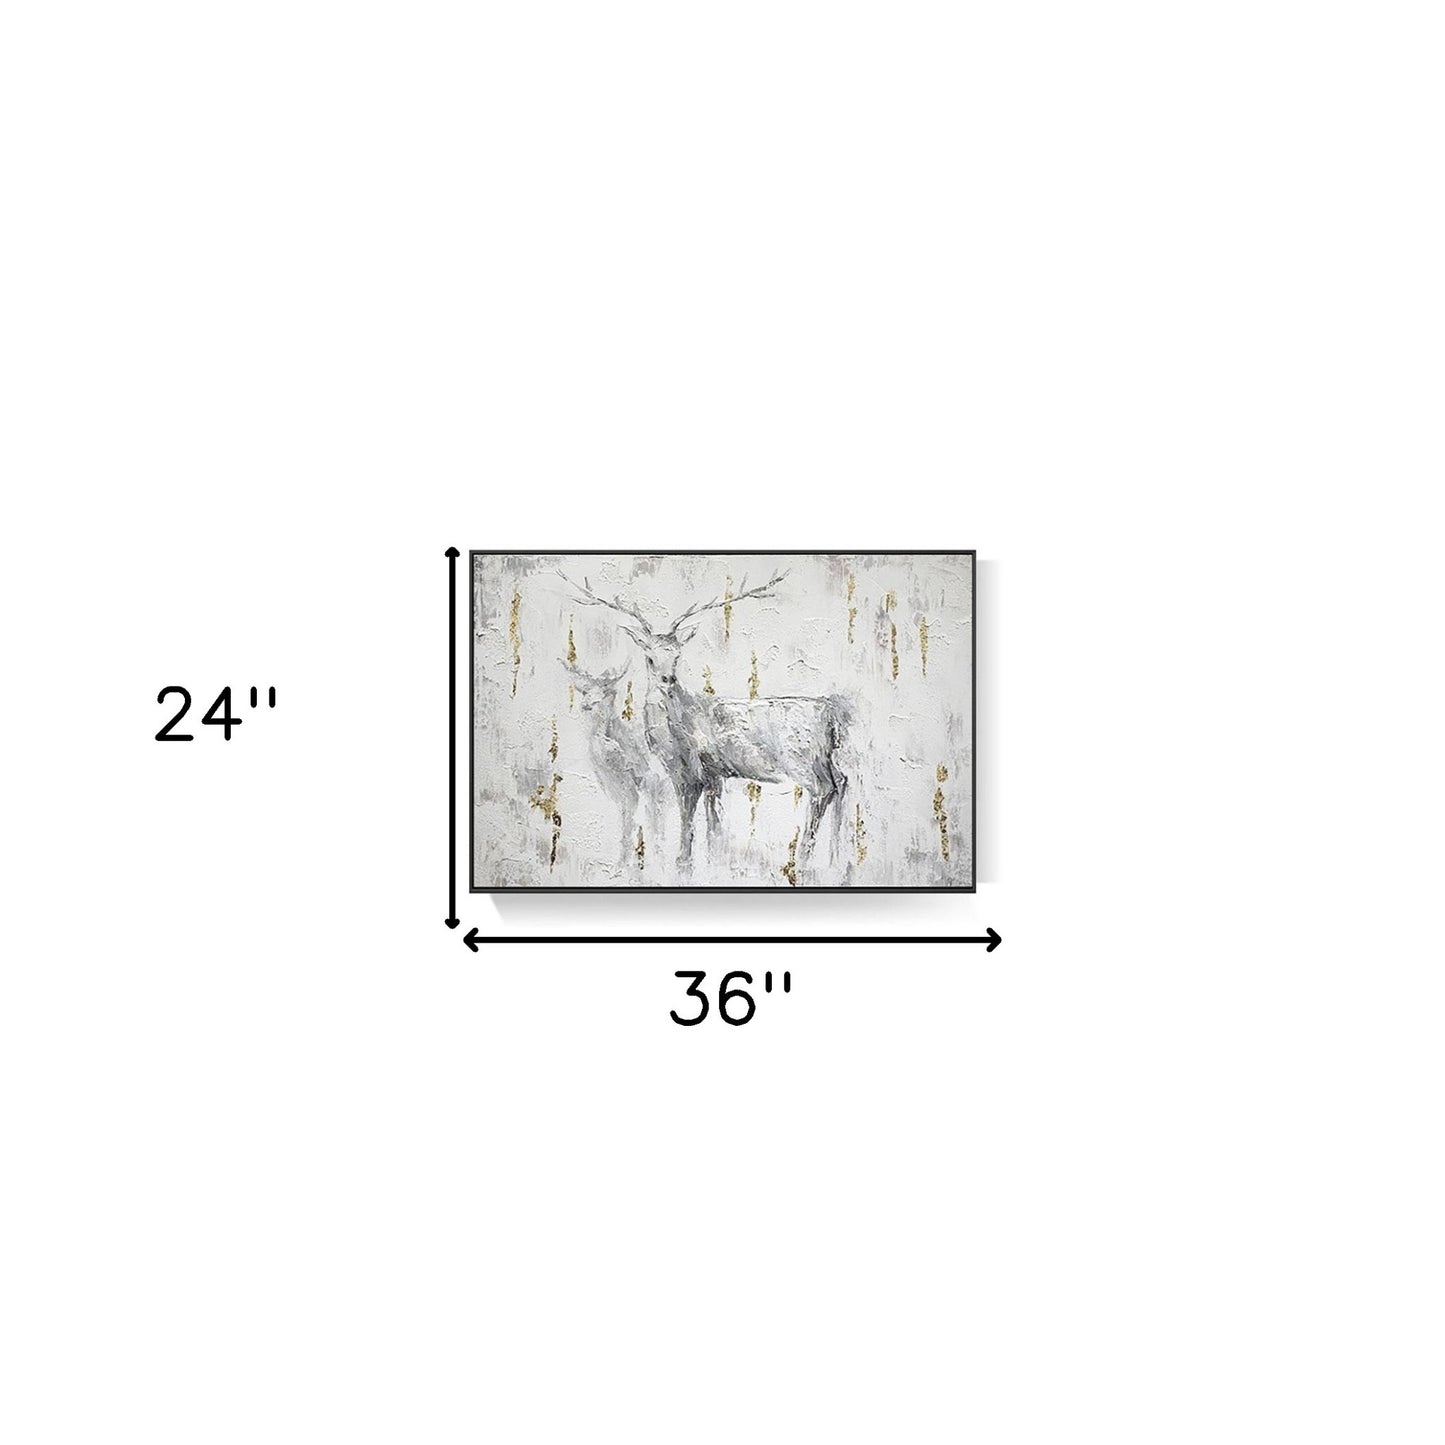 Black and White Fabric Deer Airplane Wall Decor